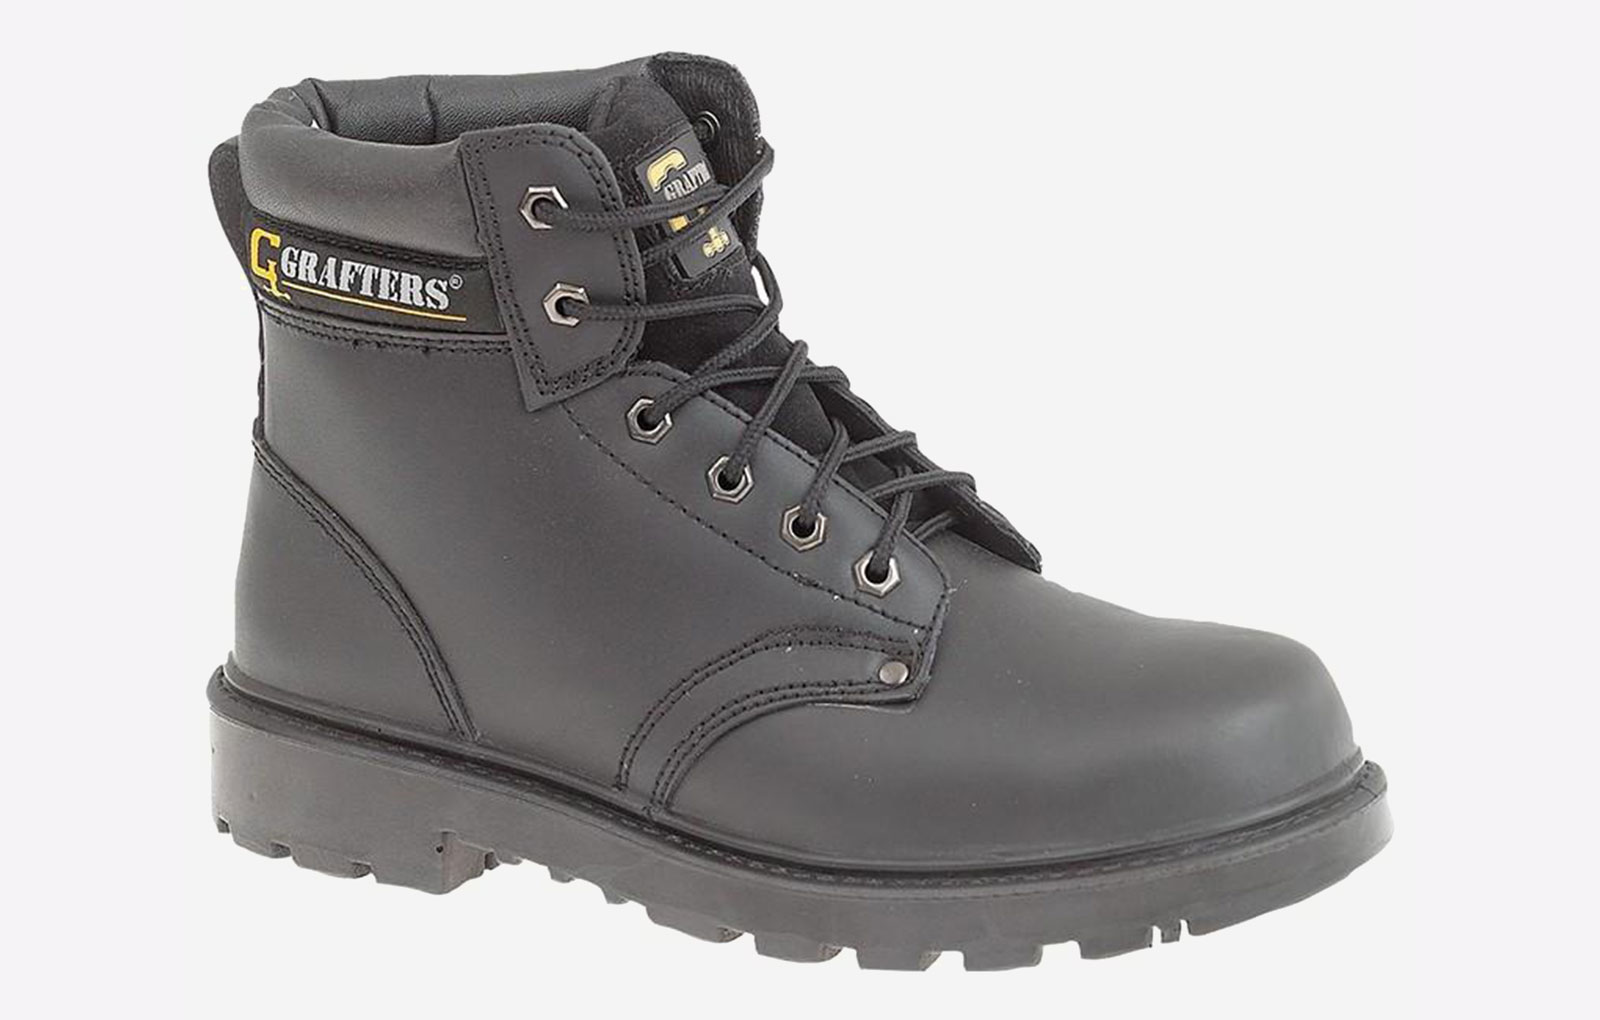 Grafters Apprentice Safety Boots Mens - GBD-1385